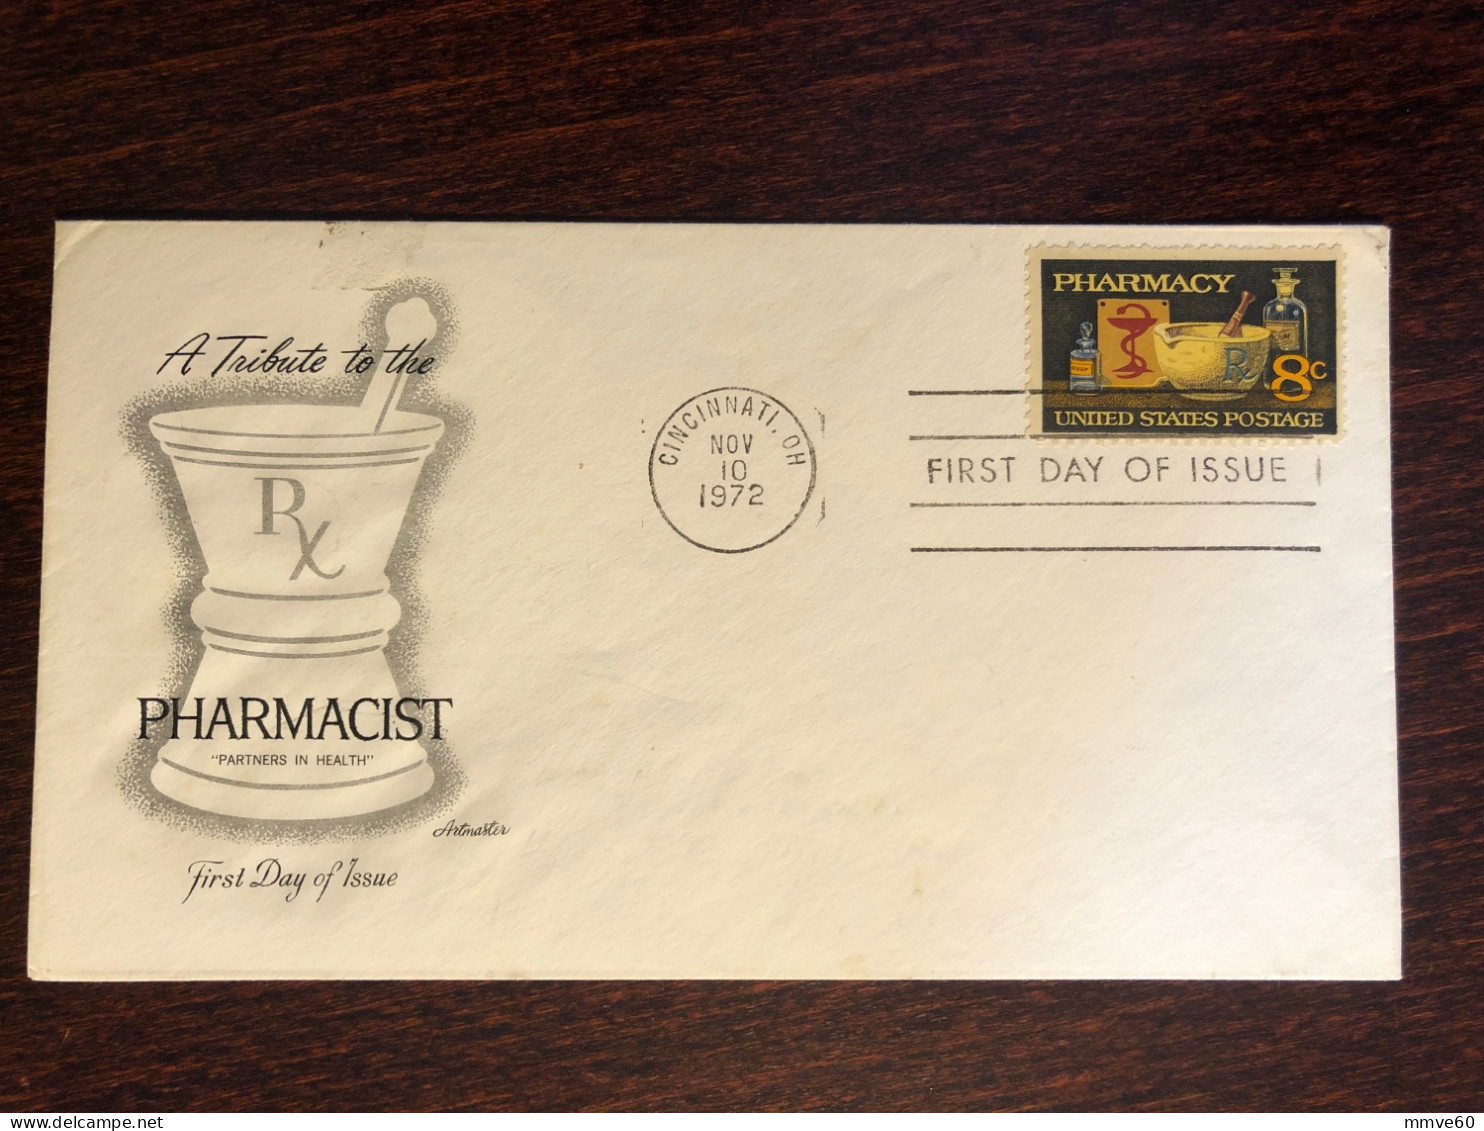 USA FDC COVER 1972 YEAR PHARMACIST PHARMACOLOGY HEALTH MEDICINE STAMPS - 1971-1980